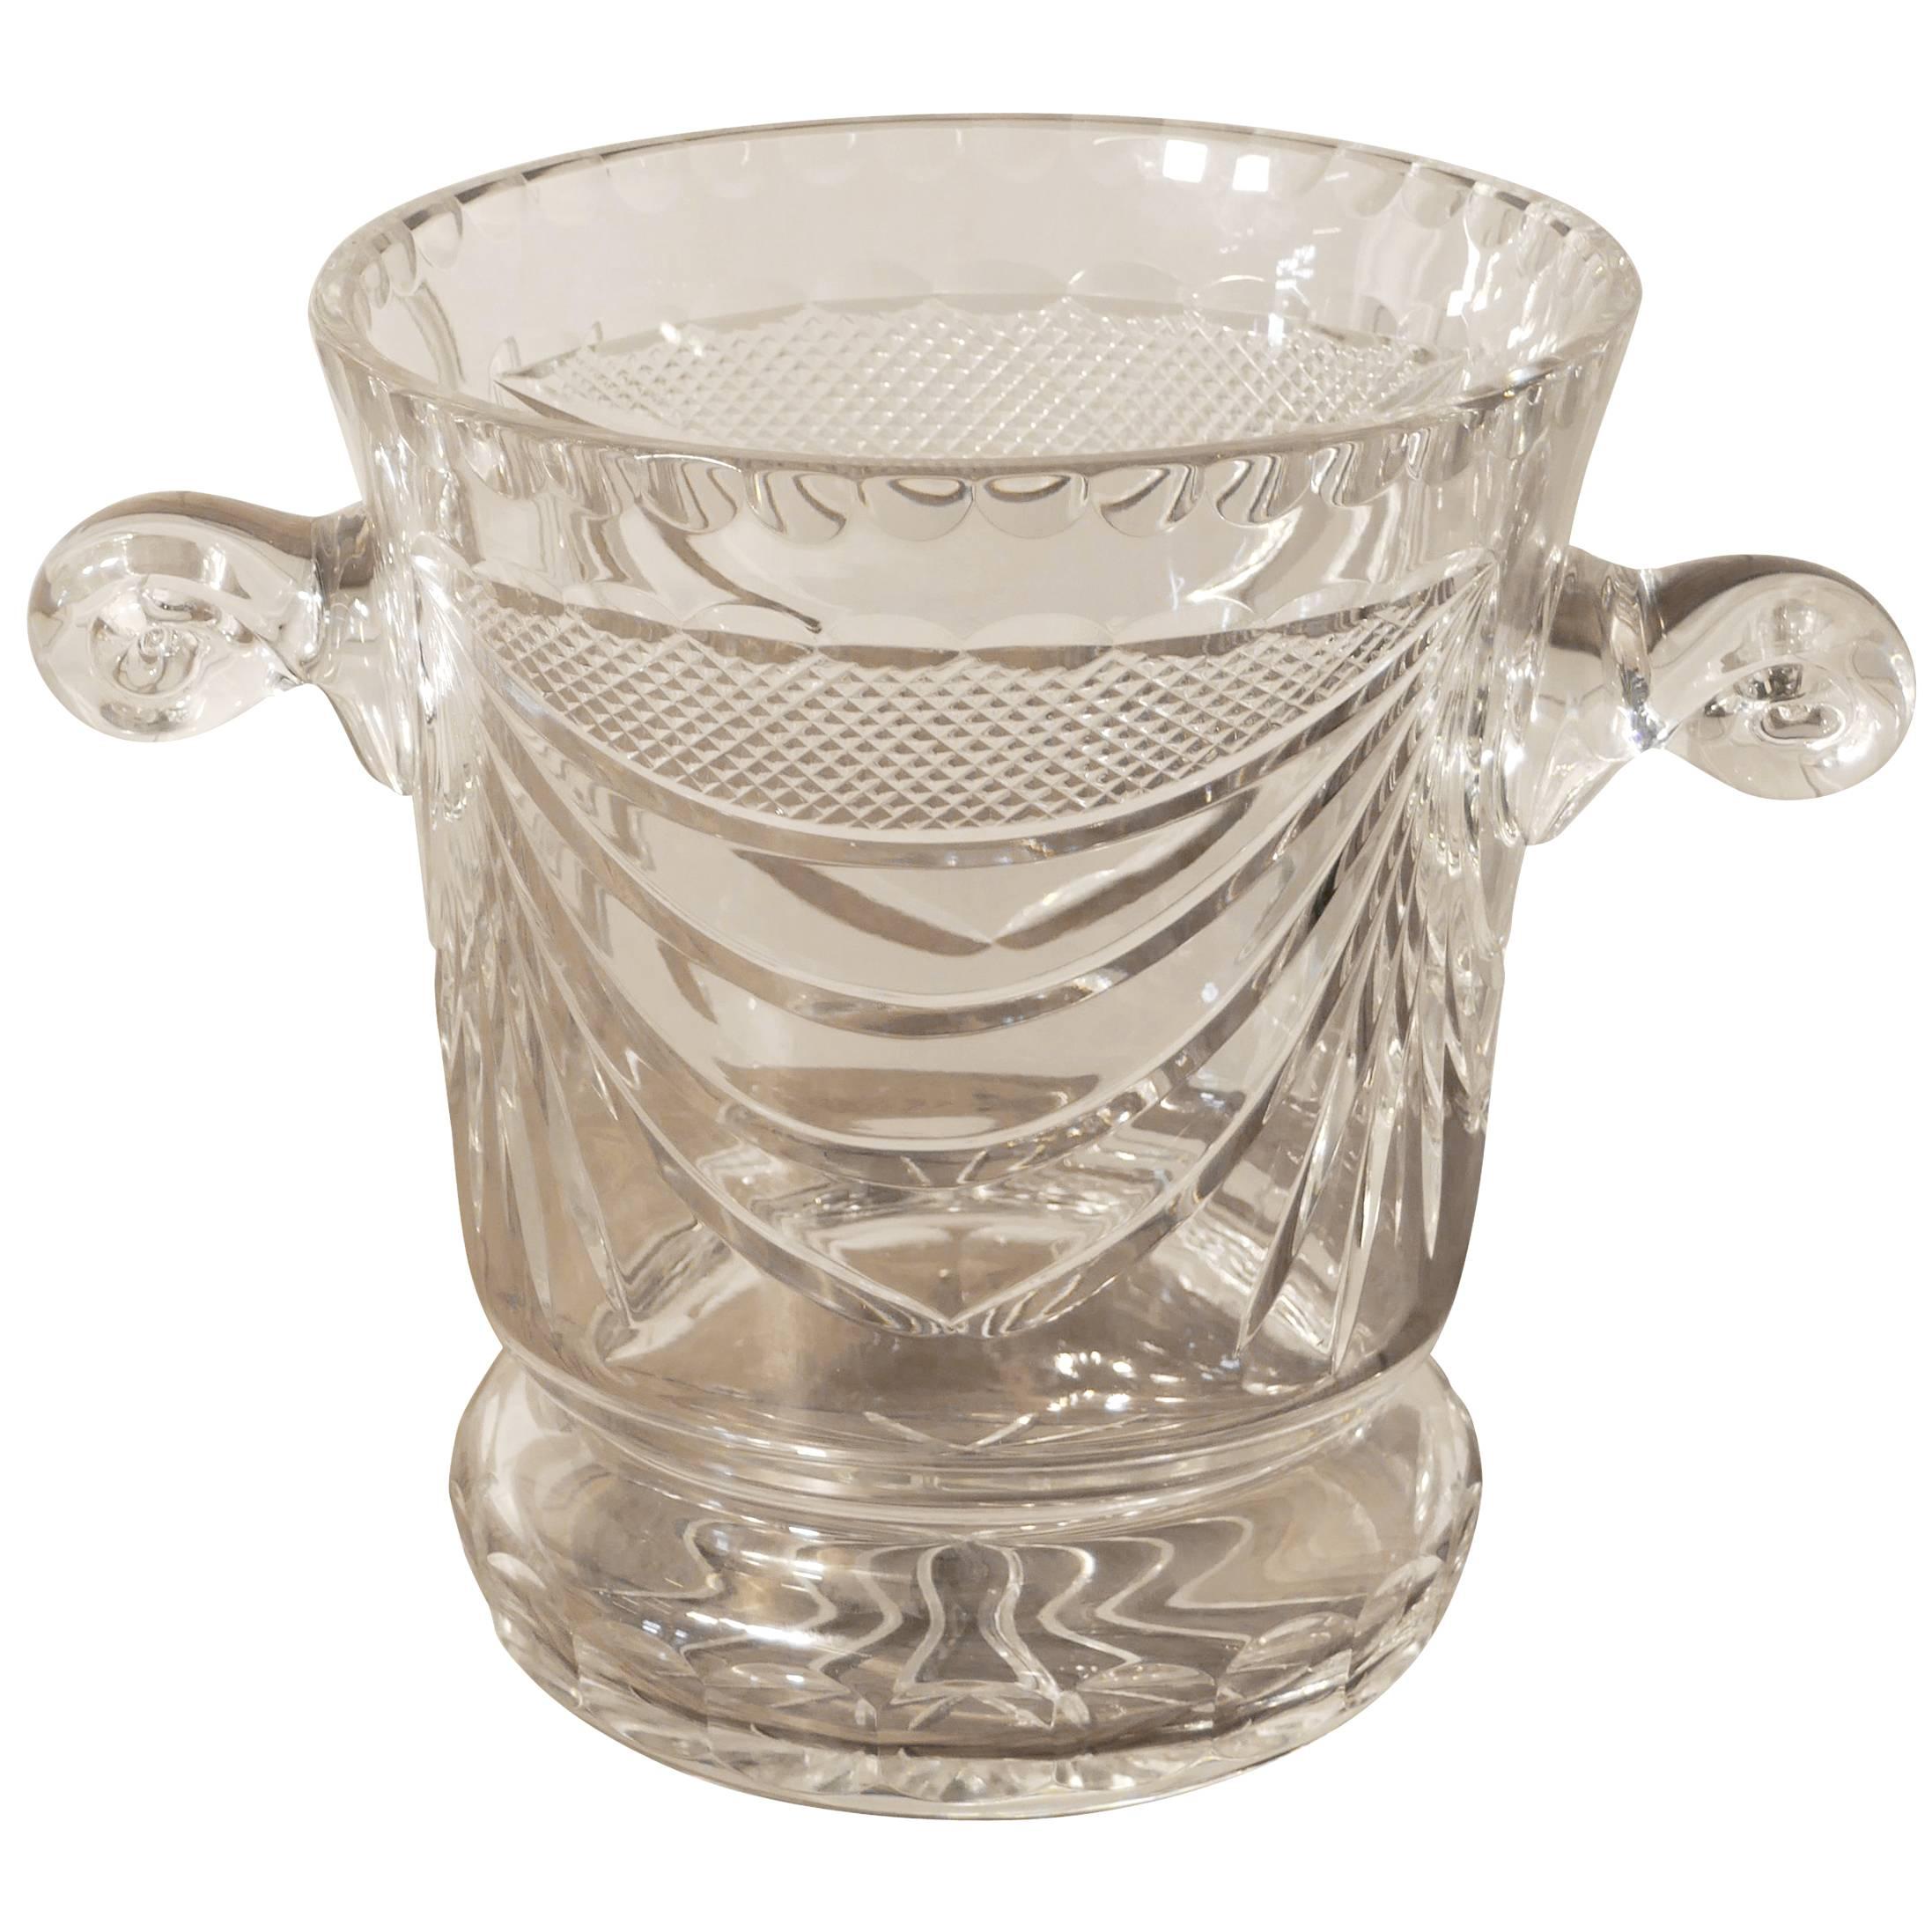 Limited Edition French Handblown and Hand-Cut Crystal Champaign Ice Bucket